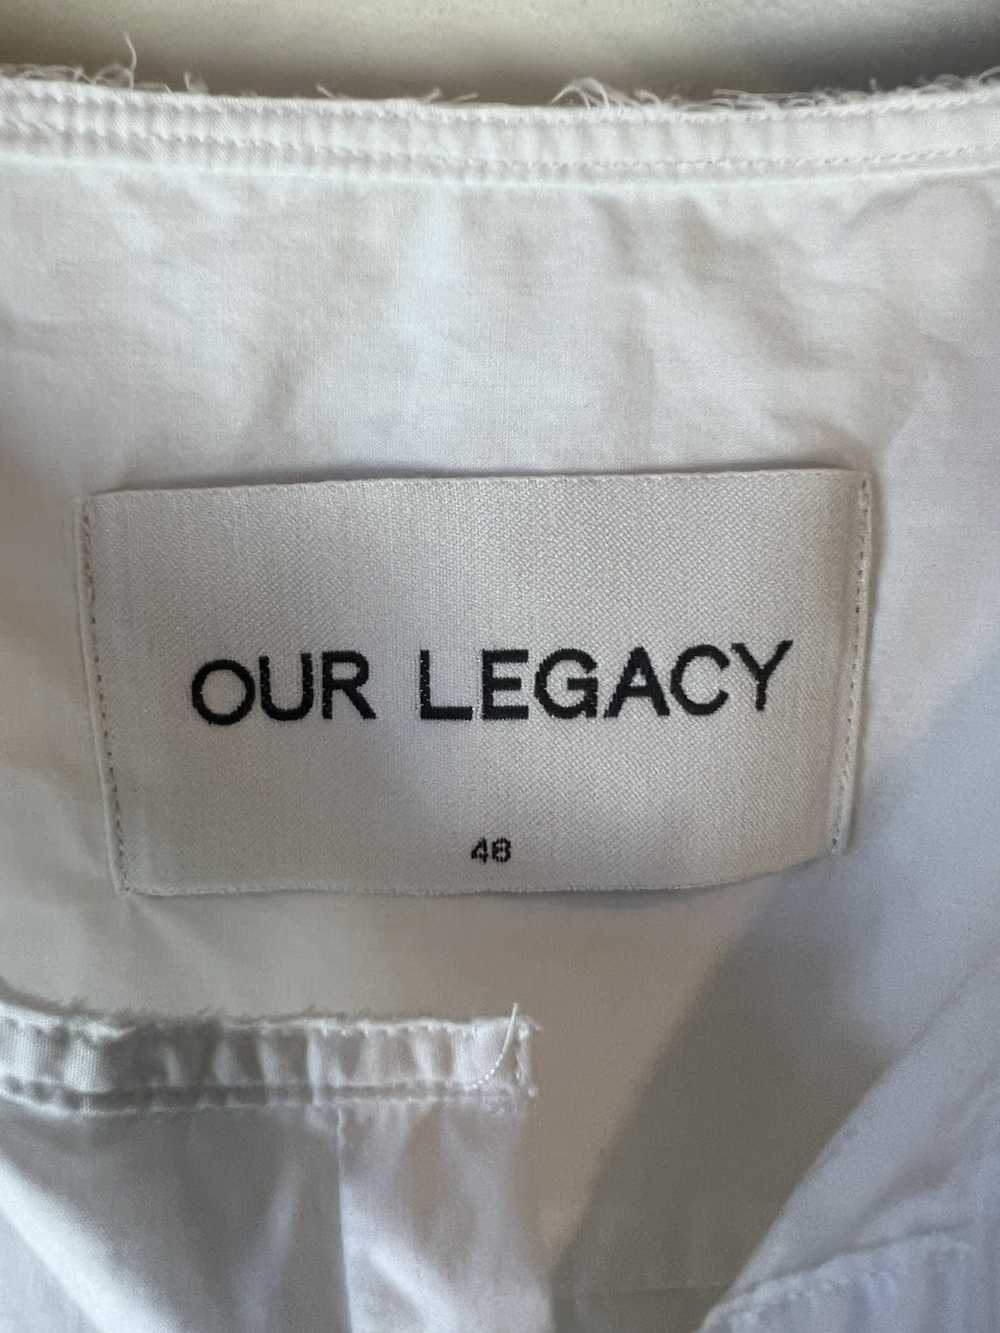 Our Legacy Our legacy ss15 - shirting button up - image 3